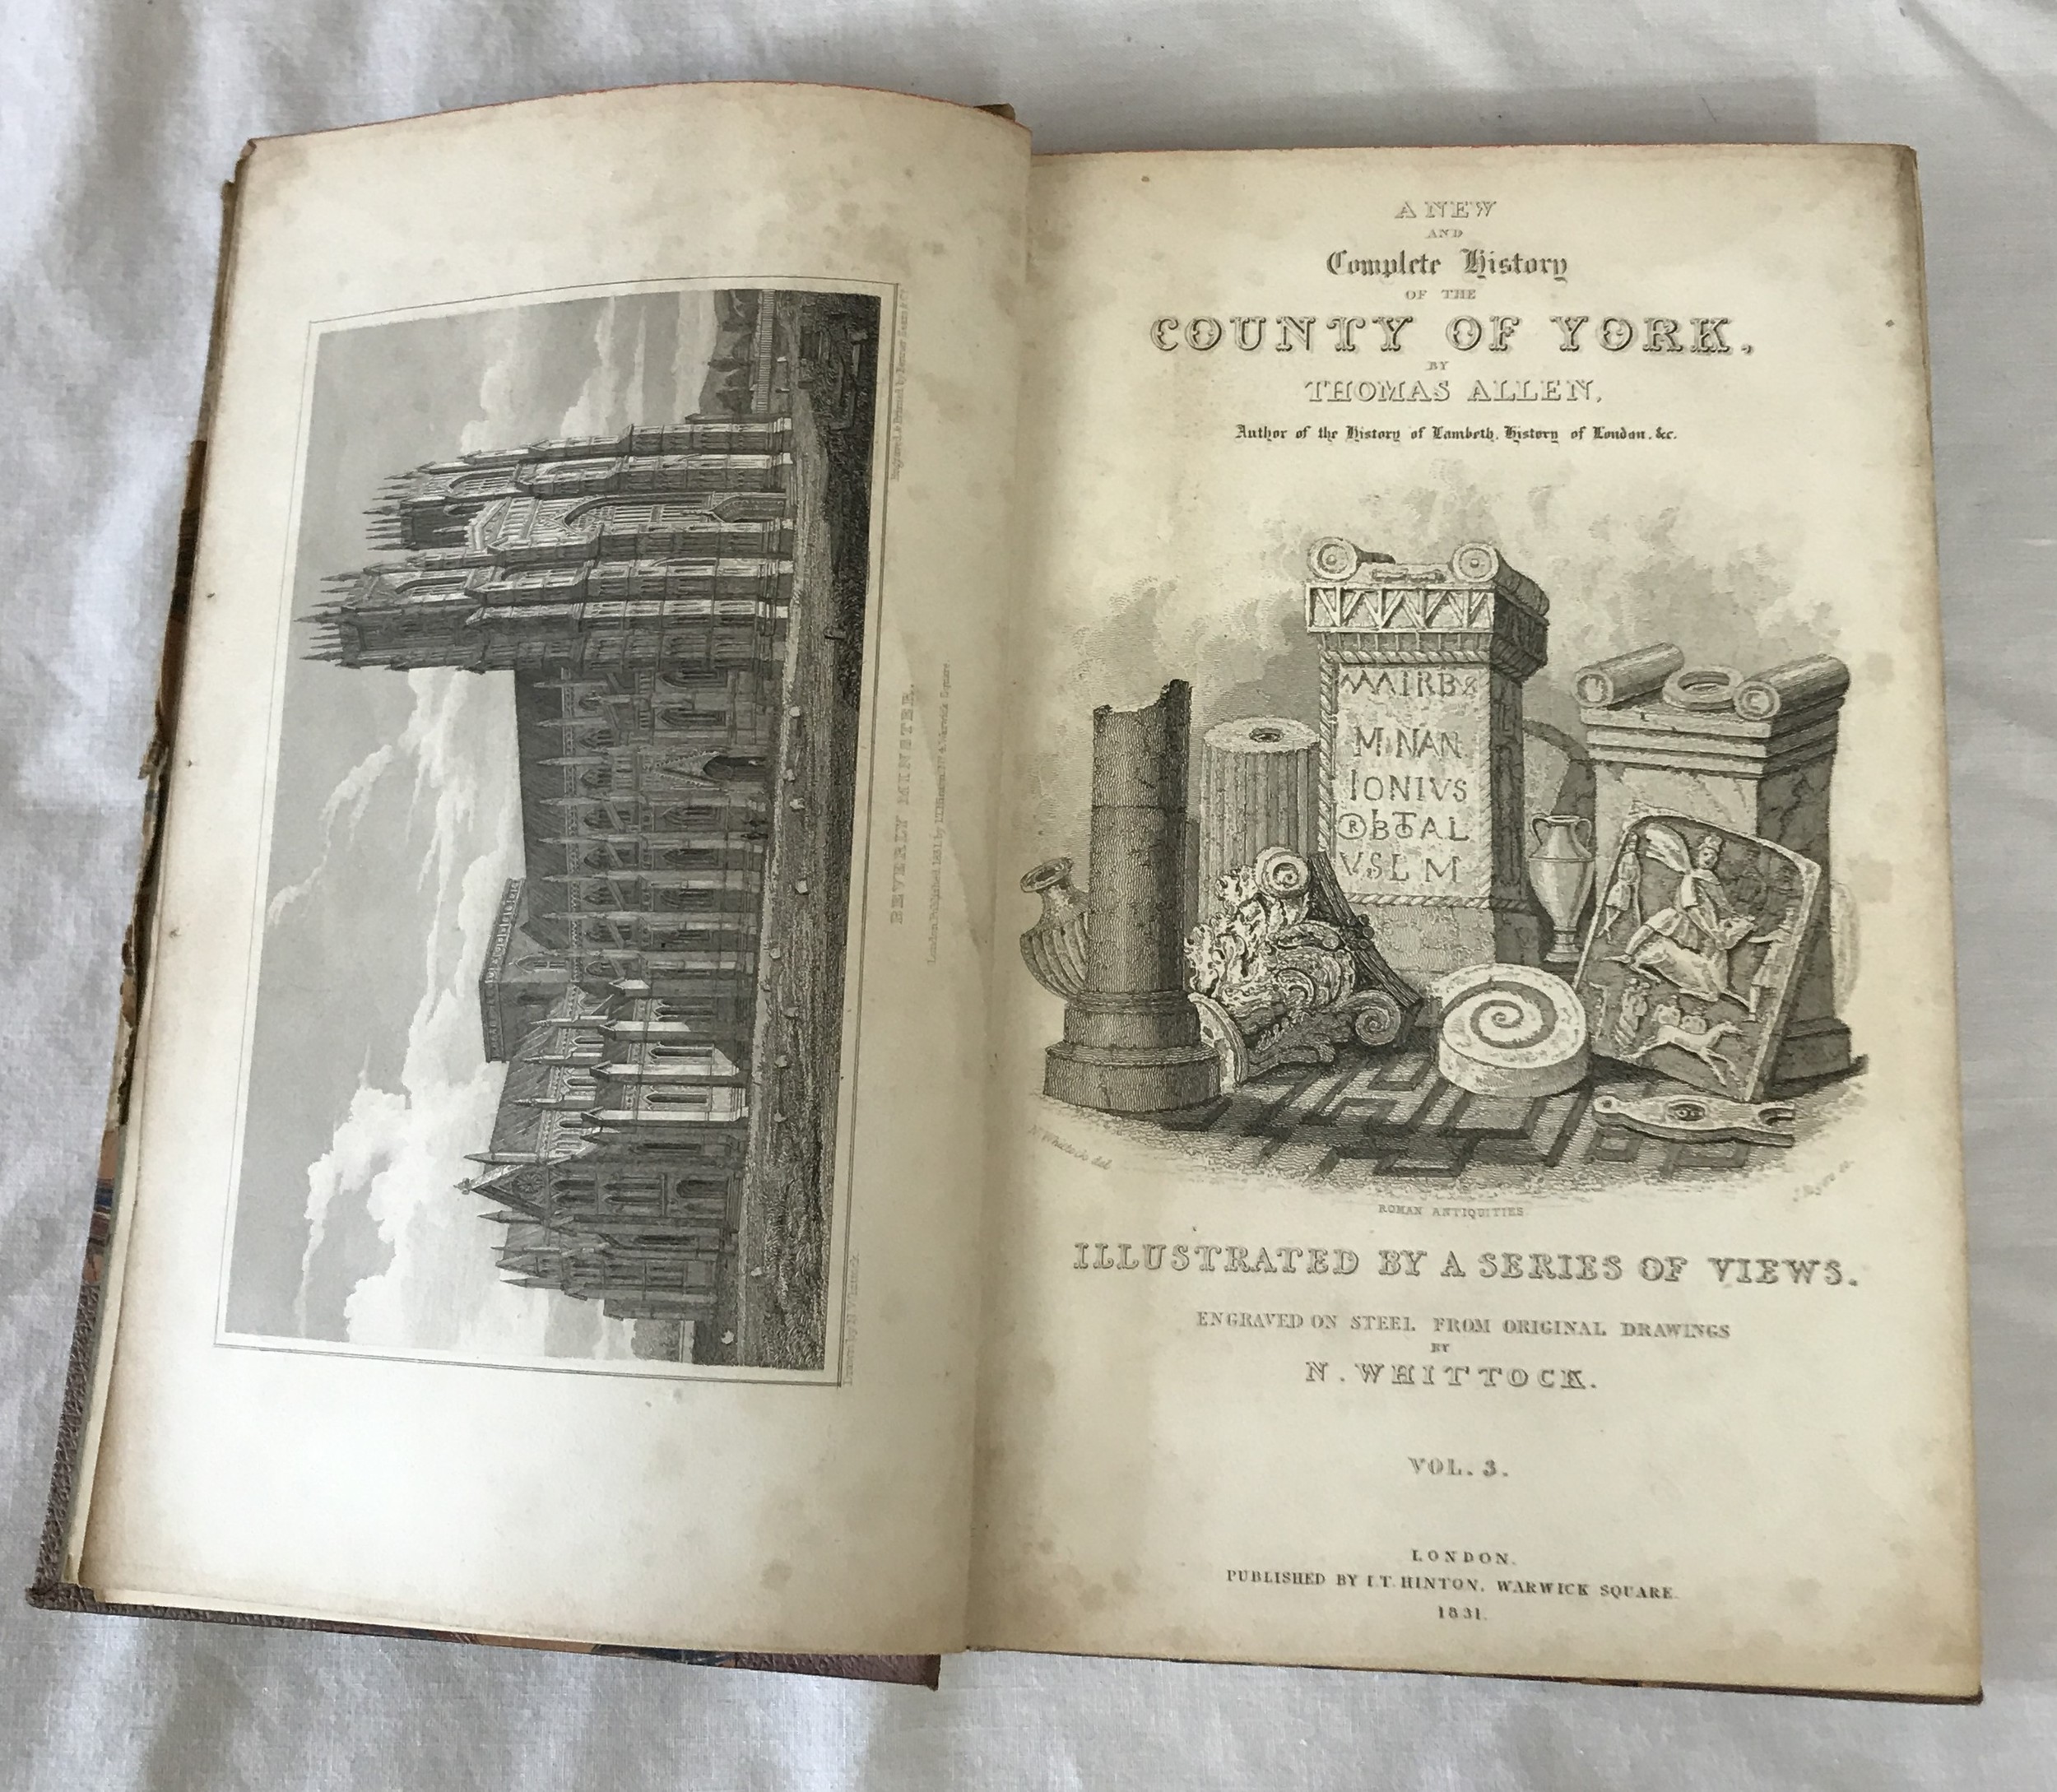 Allen, Thomas – A New and Complete History of the County of York. Vol 3 only. Complete with some - Image 3 of 9